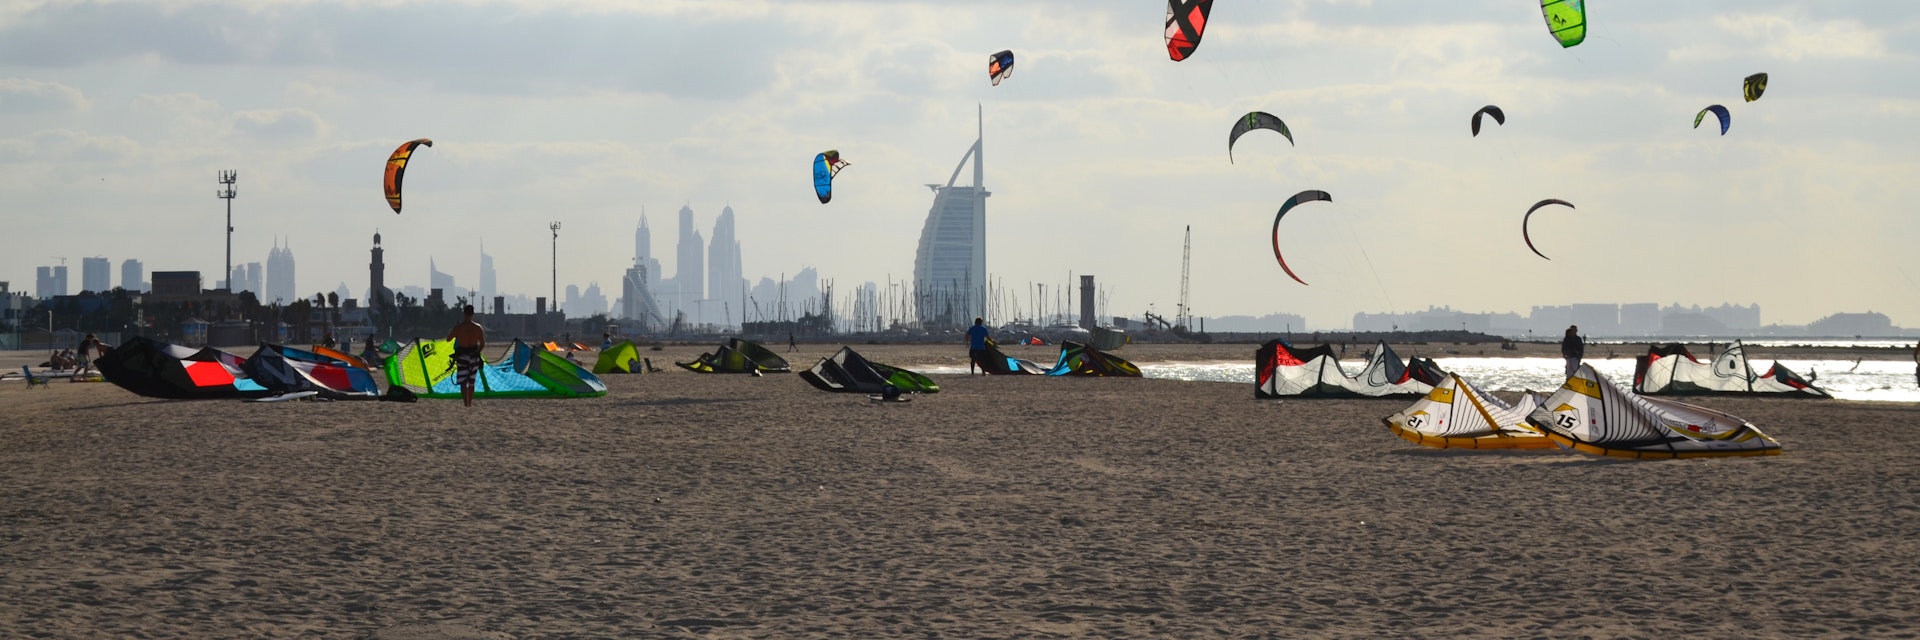 11/30/2014. Kite beach in Jumeirah, Dubai, United Arab Emirates. A stretch of the beach designated for the kite surfers. The iconic Burj Al Arab is seen on the background.; Shutterstock ID 664989337; Your name (First / Last): Lauren Keith; GL account no.: 65050; Netsuite department name: Online Editorial; Full Product or Project name including edition: Authentic Dubai Article